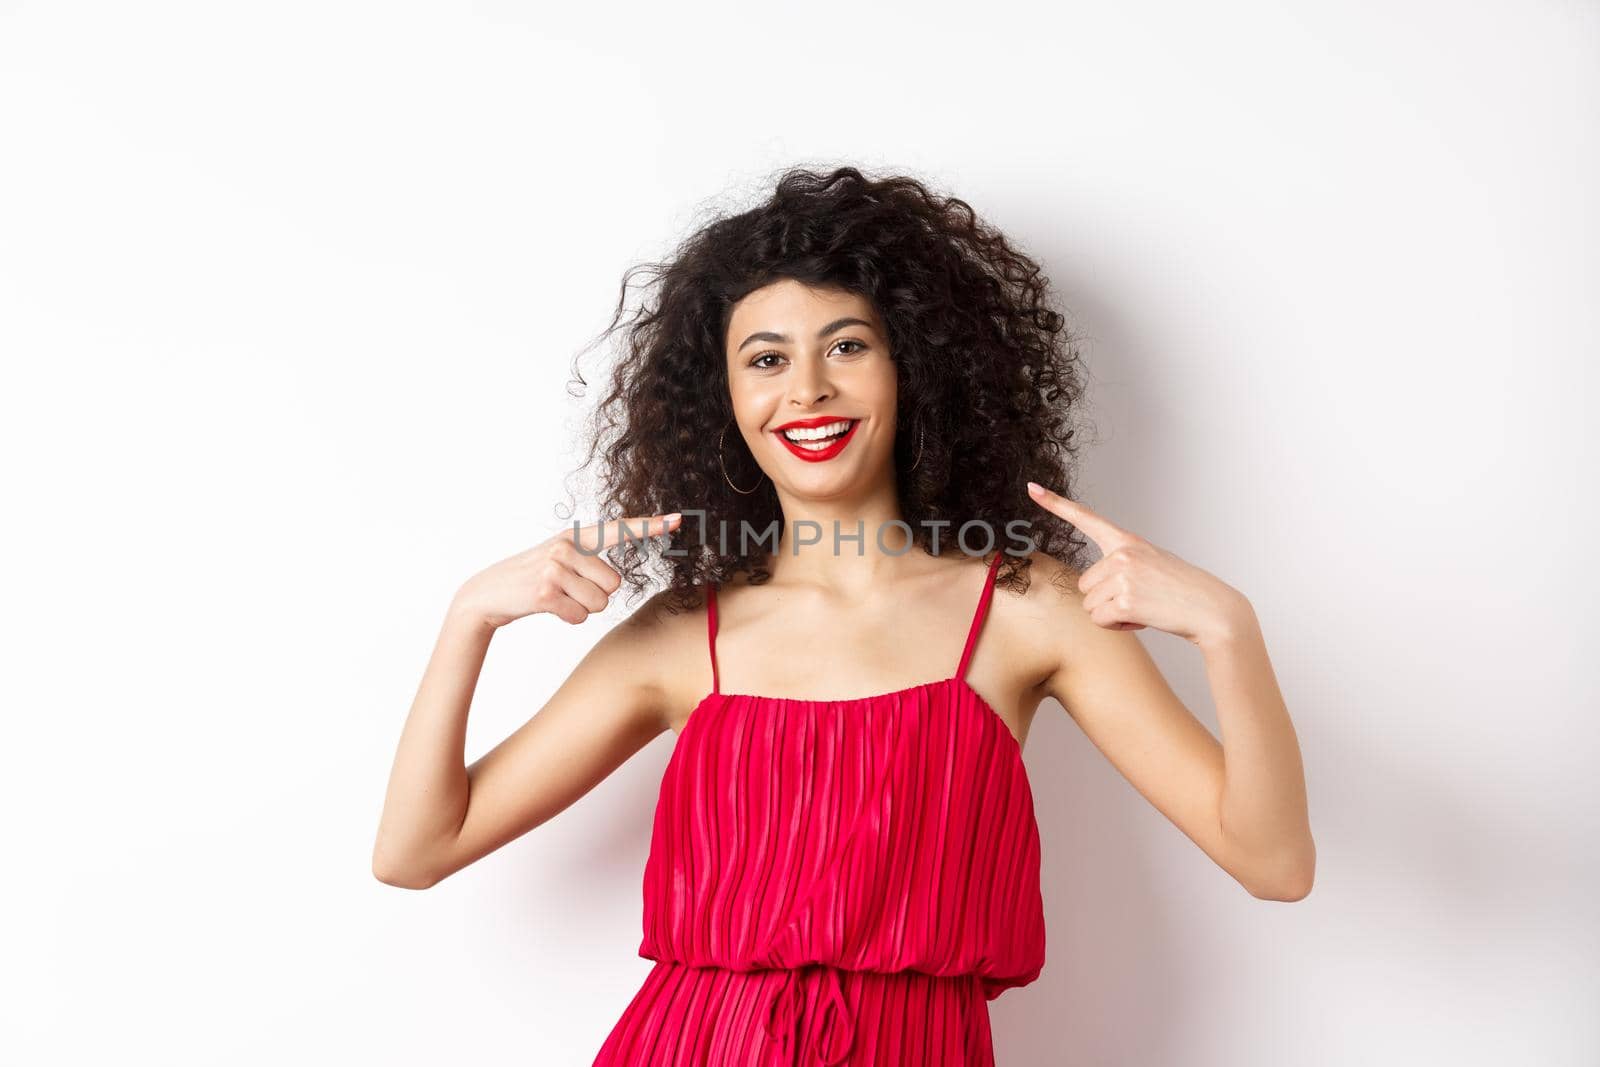 Beautiful woman with curly hairstyle, makeup and red dress, pointing at herself, smiling with white teeth, standing on white background by Benzoix